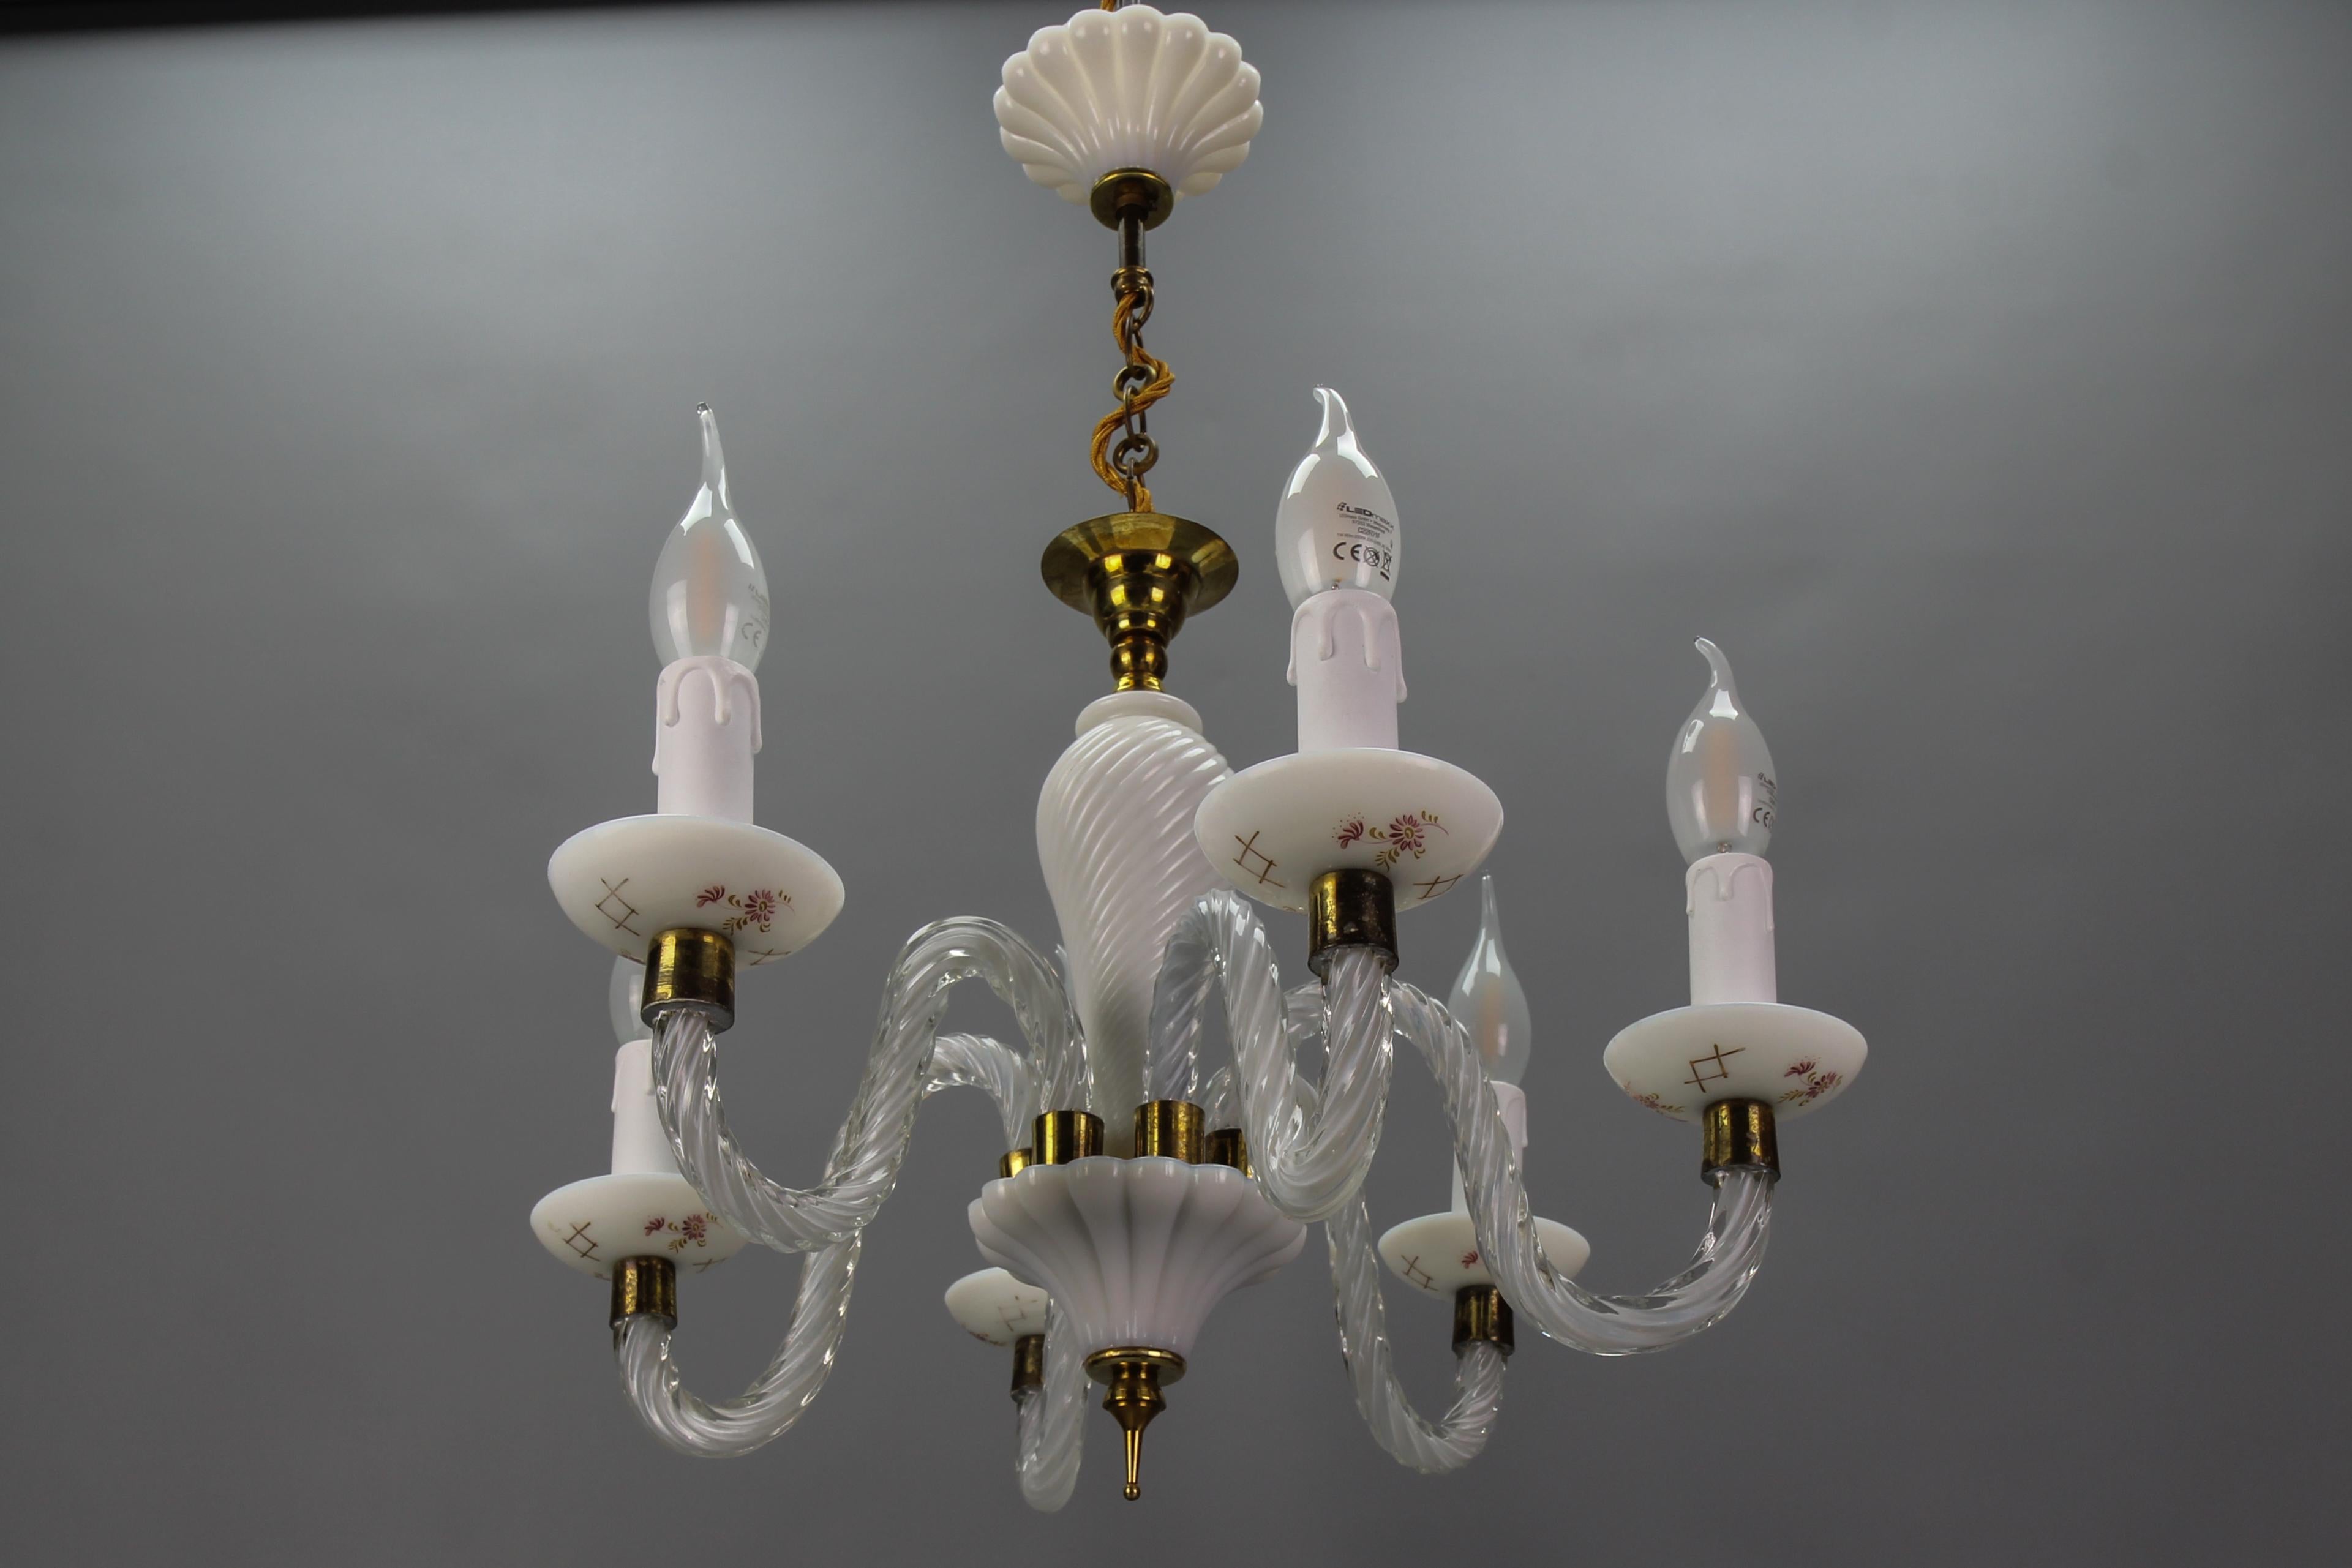 Italian Murano white milk glass and clear glass six-arm chandelier, the 1950s
This absolutely delightful Mid-Century Murano glass chandelier features six clear and milk glass arms with brass details and white milk glass bobeches with floral